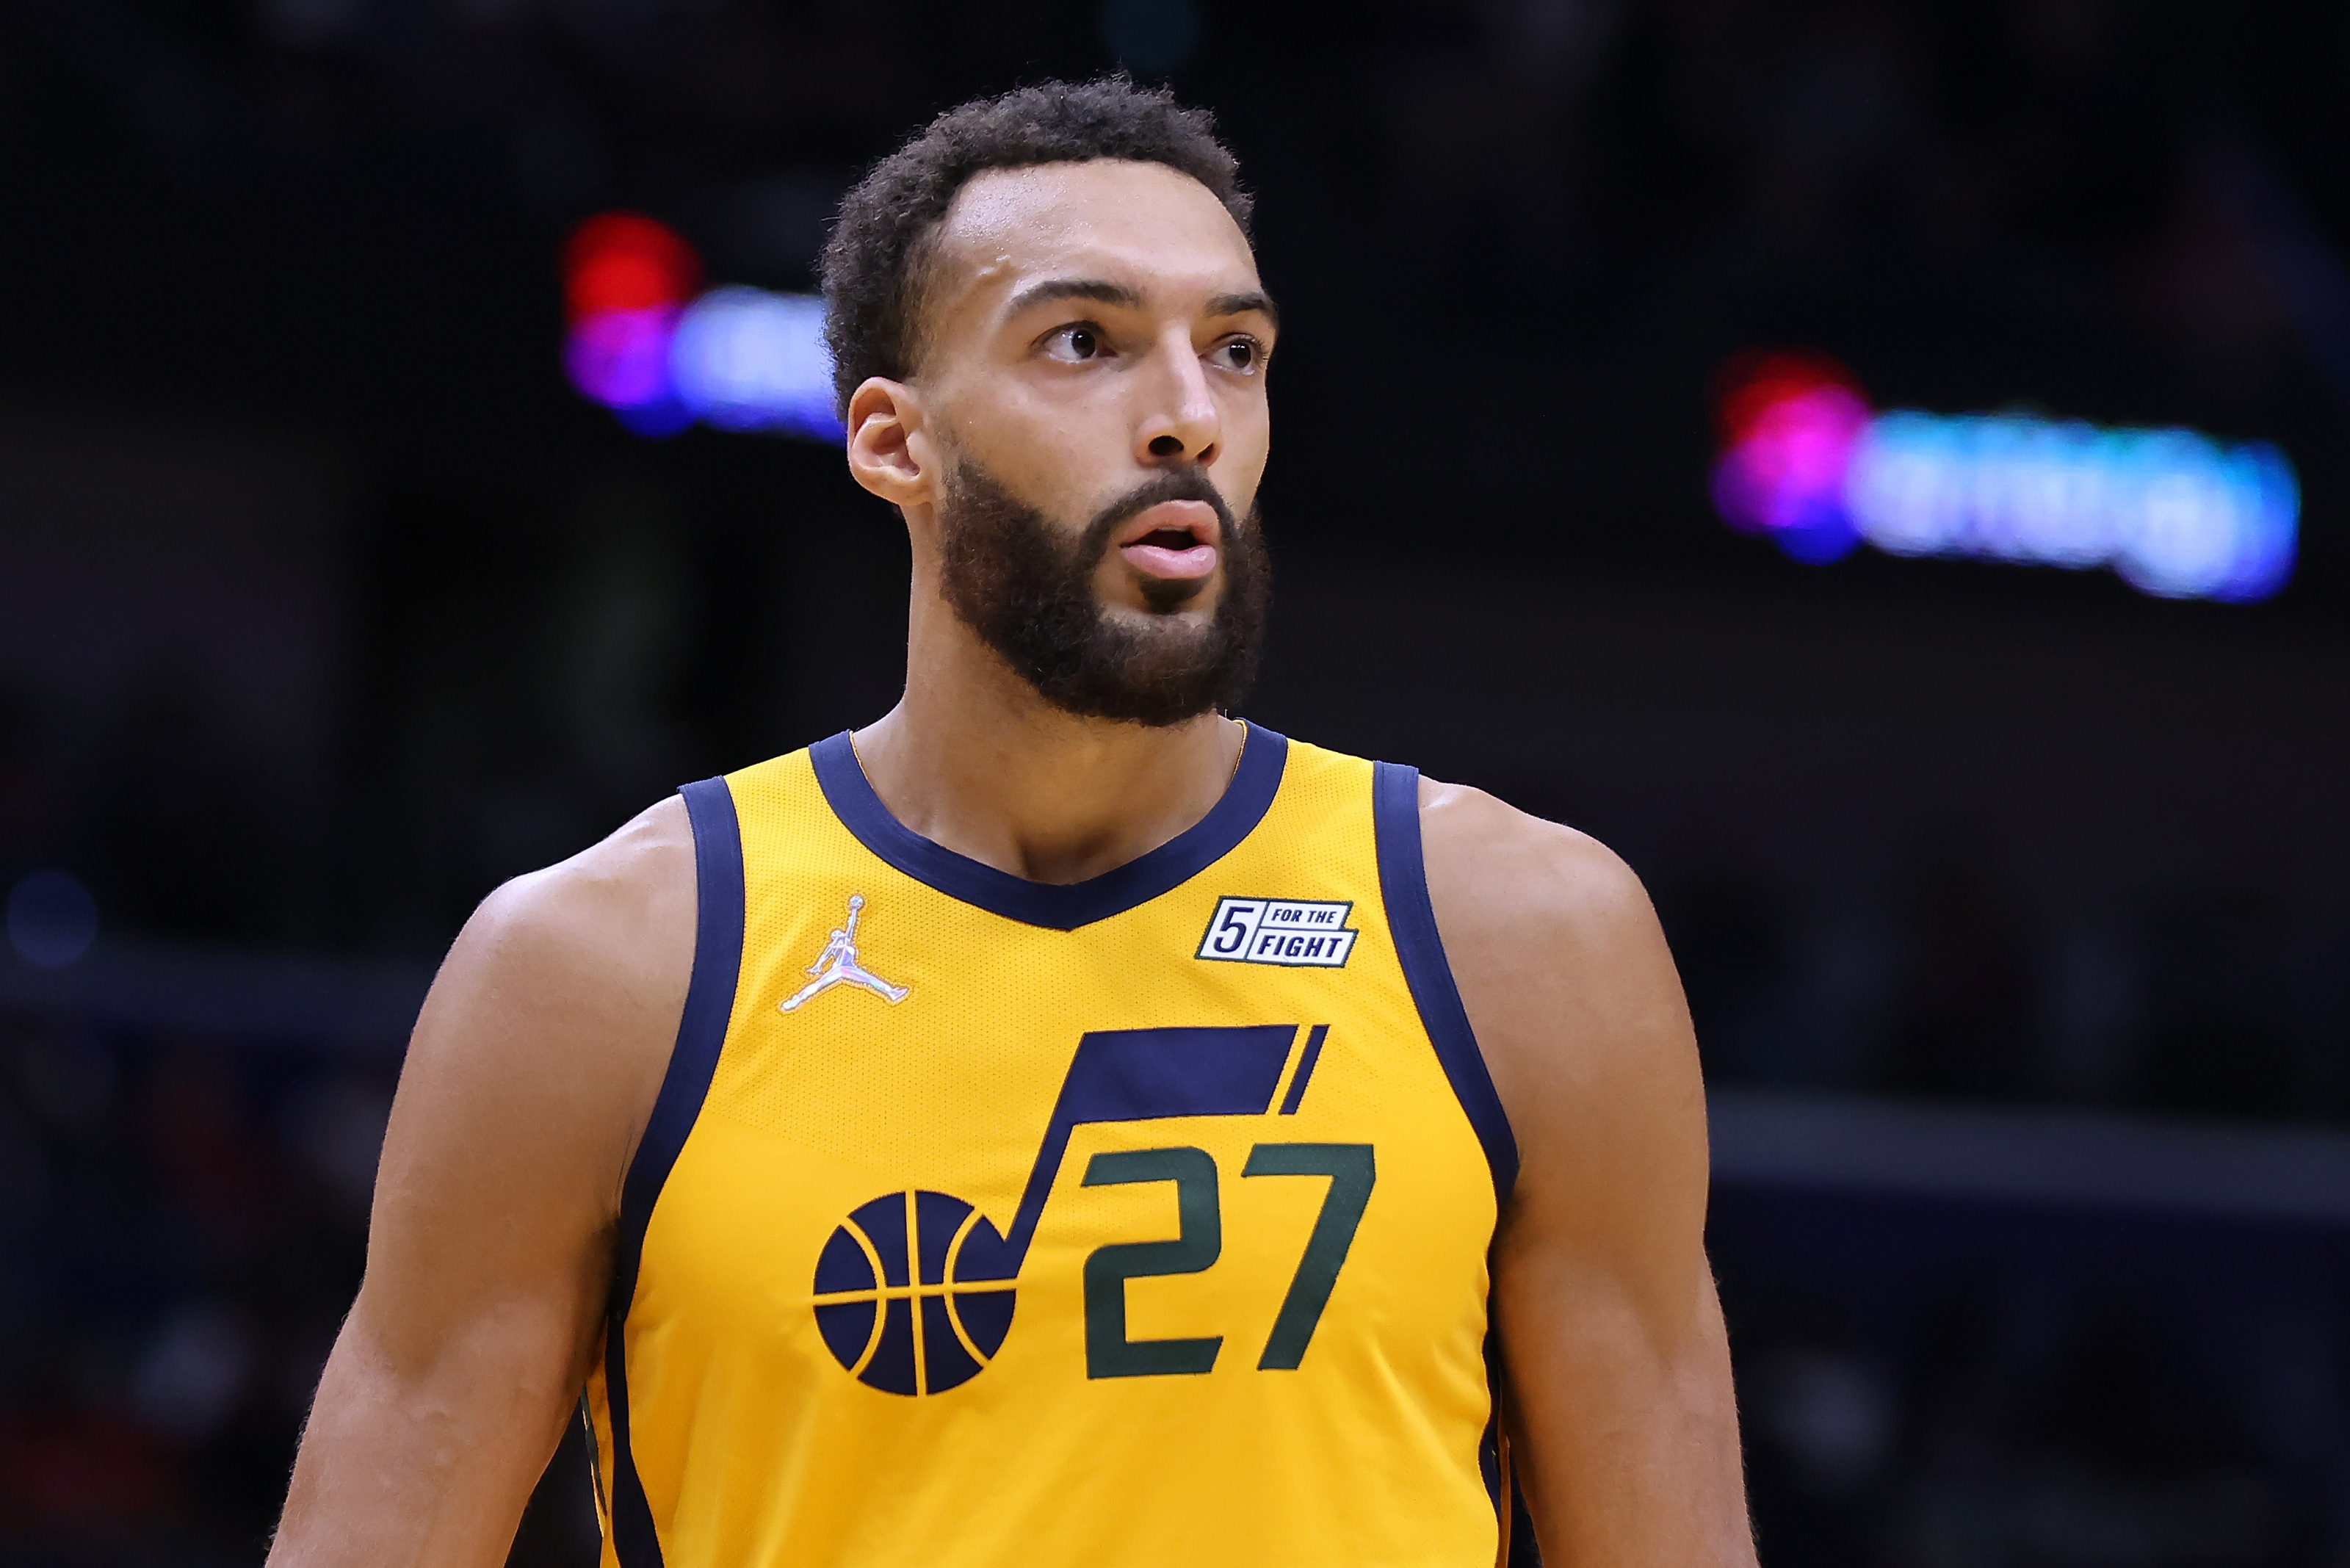 Rudy Gobert gets into a new altercation in Heat-Jazz game